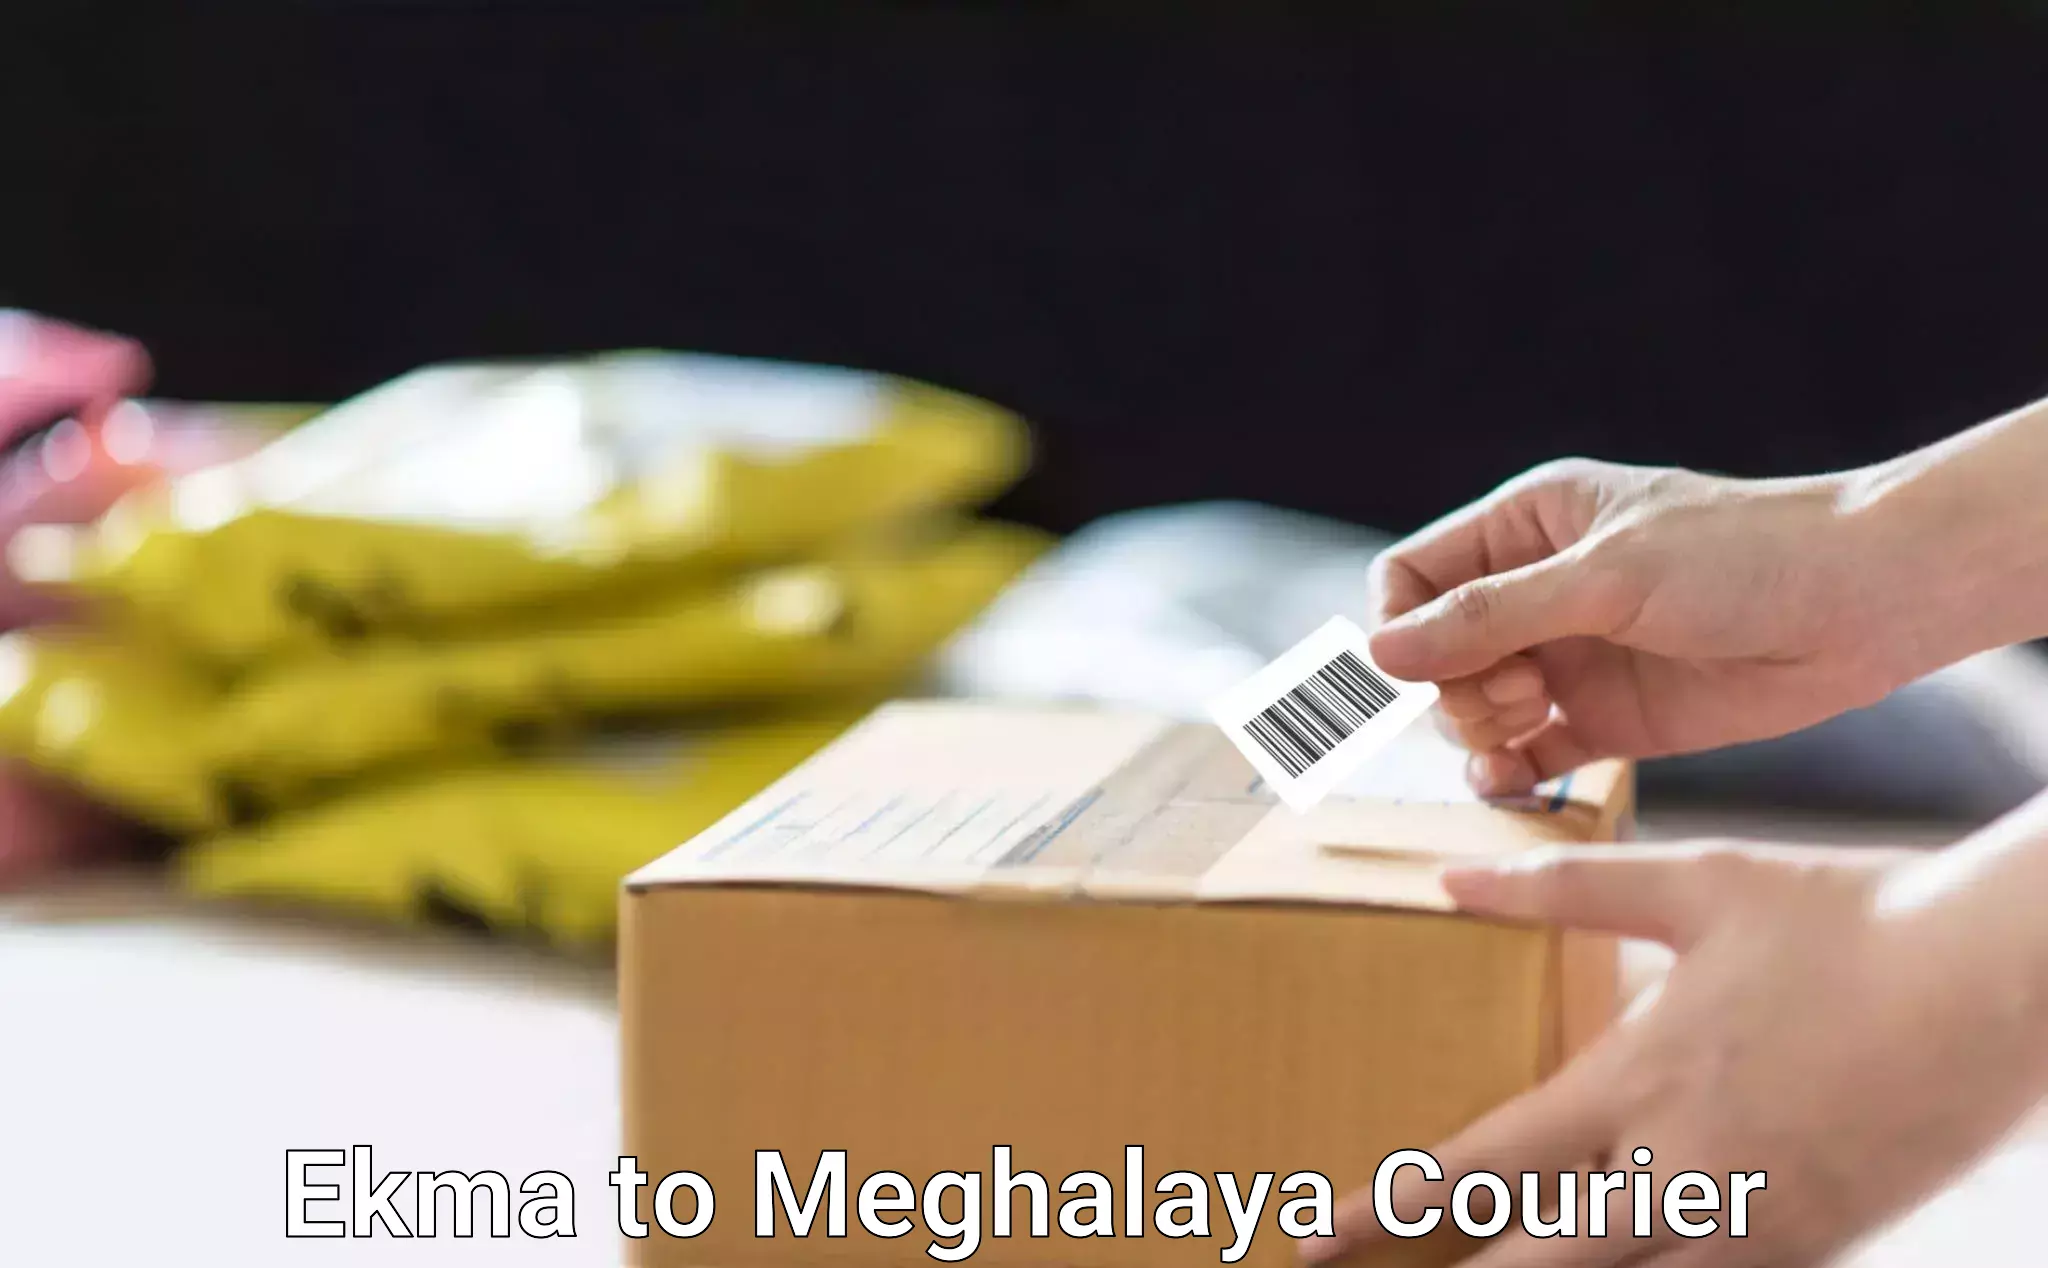 Professional packing services in Ekma to Meghalaya